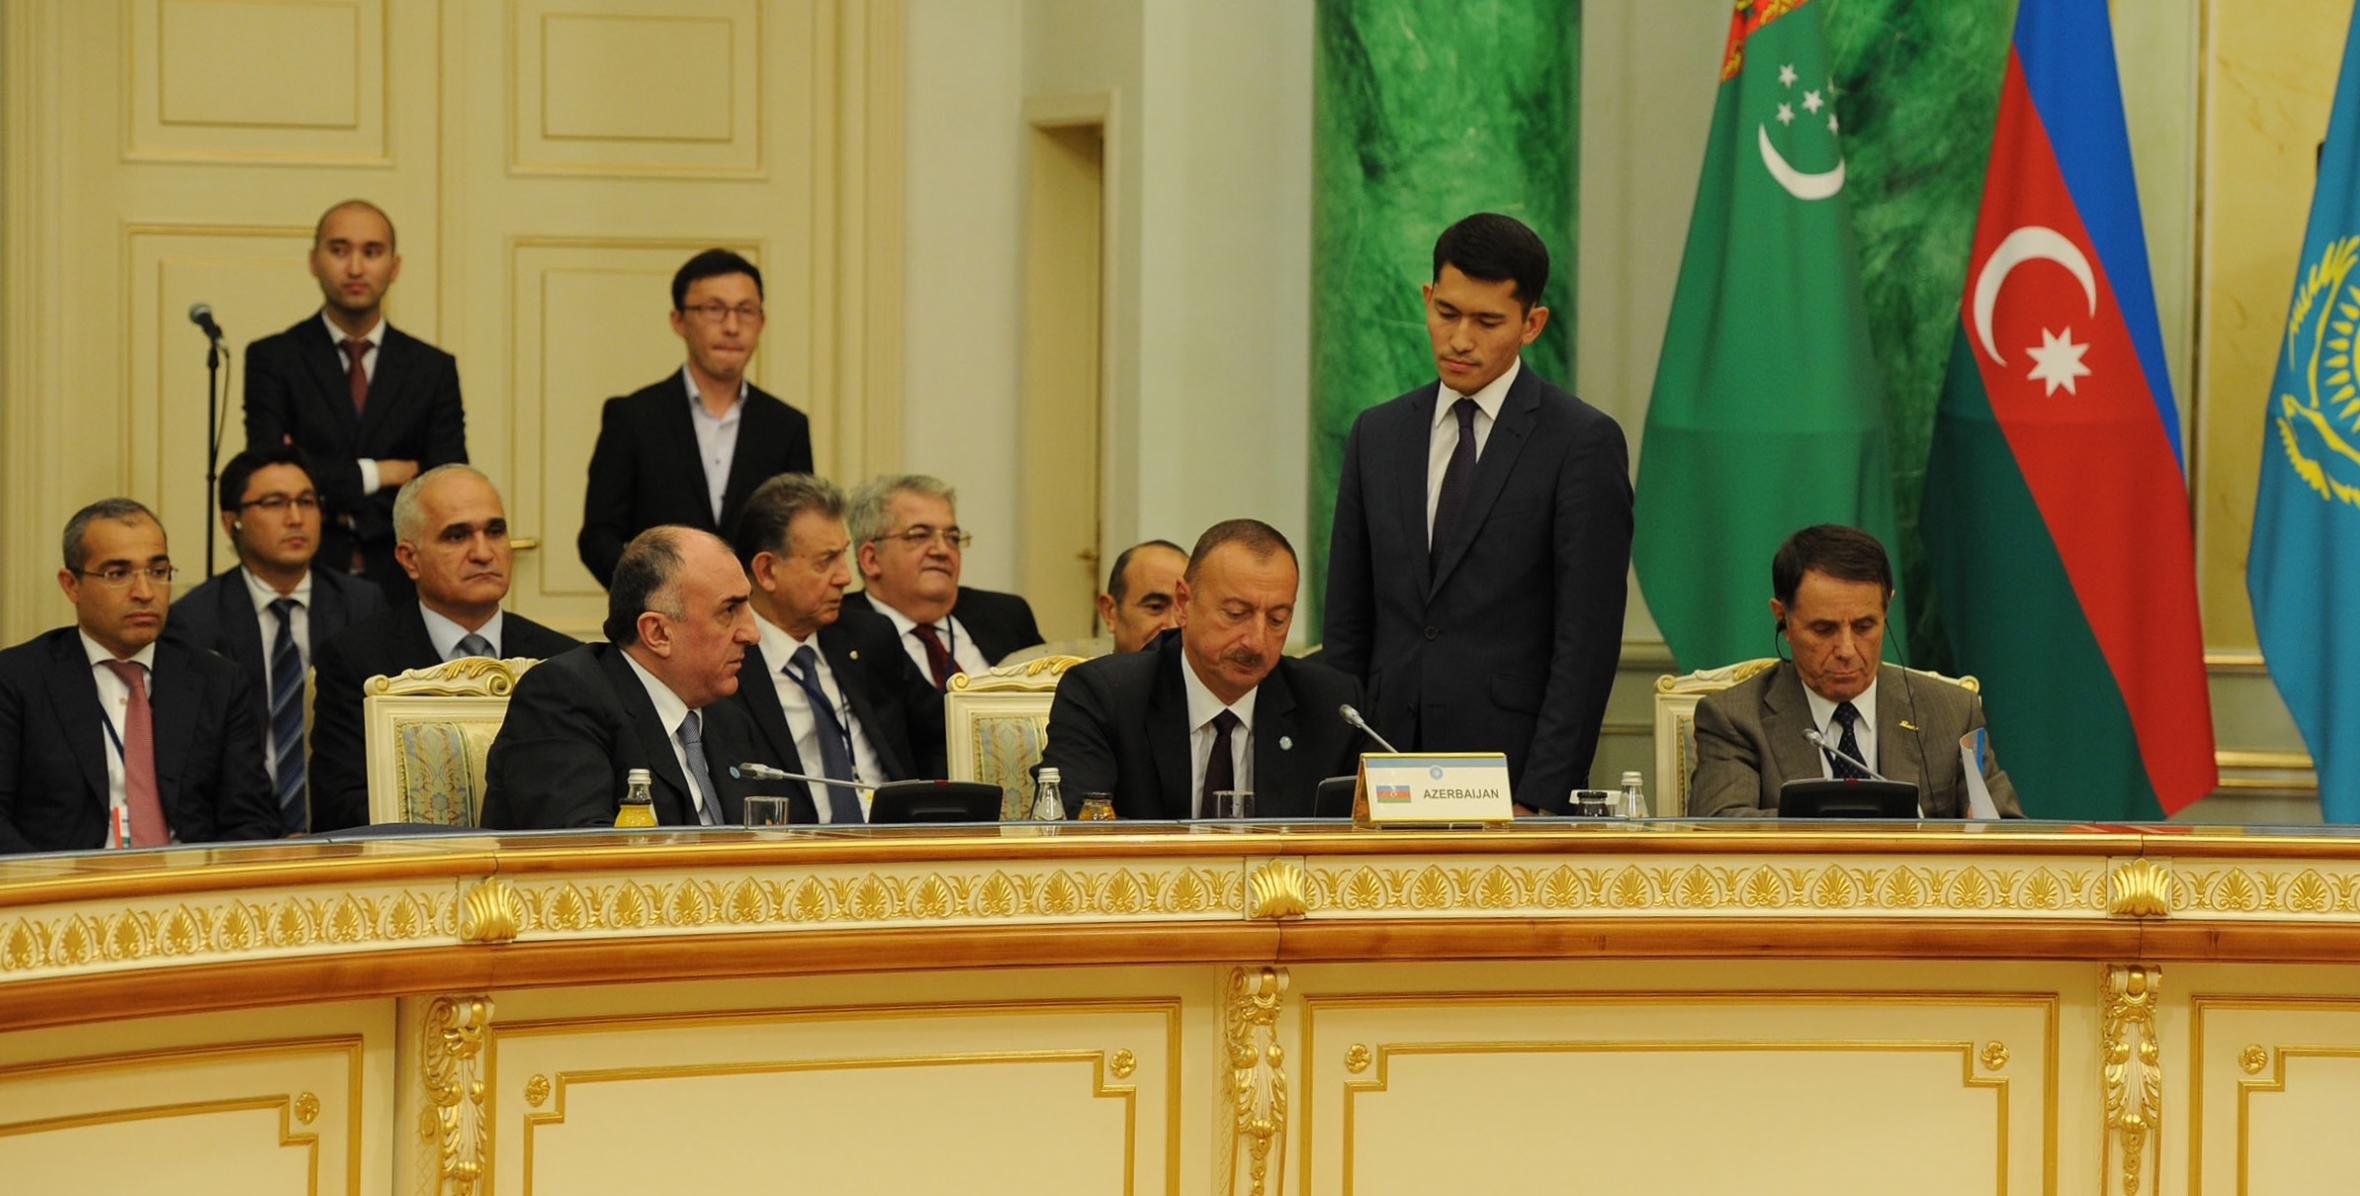 Ilham Aliyev attended the 5th Summit of the Cooperation Council of Turkic Speaking States